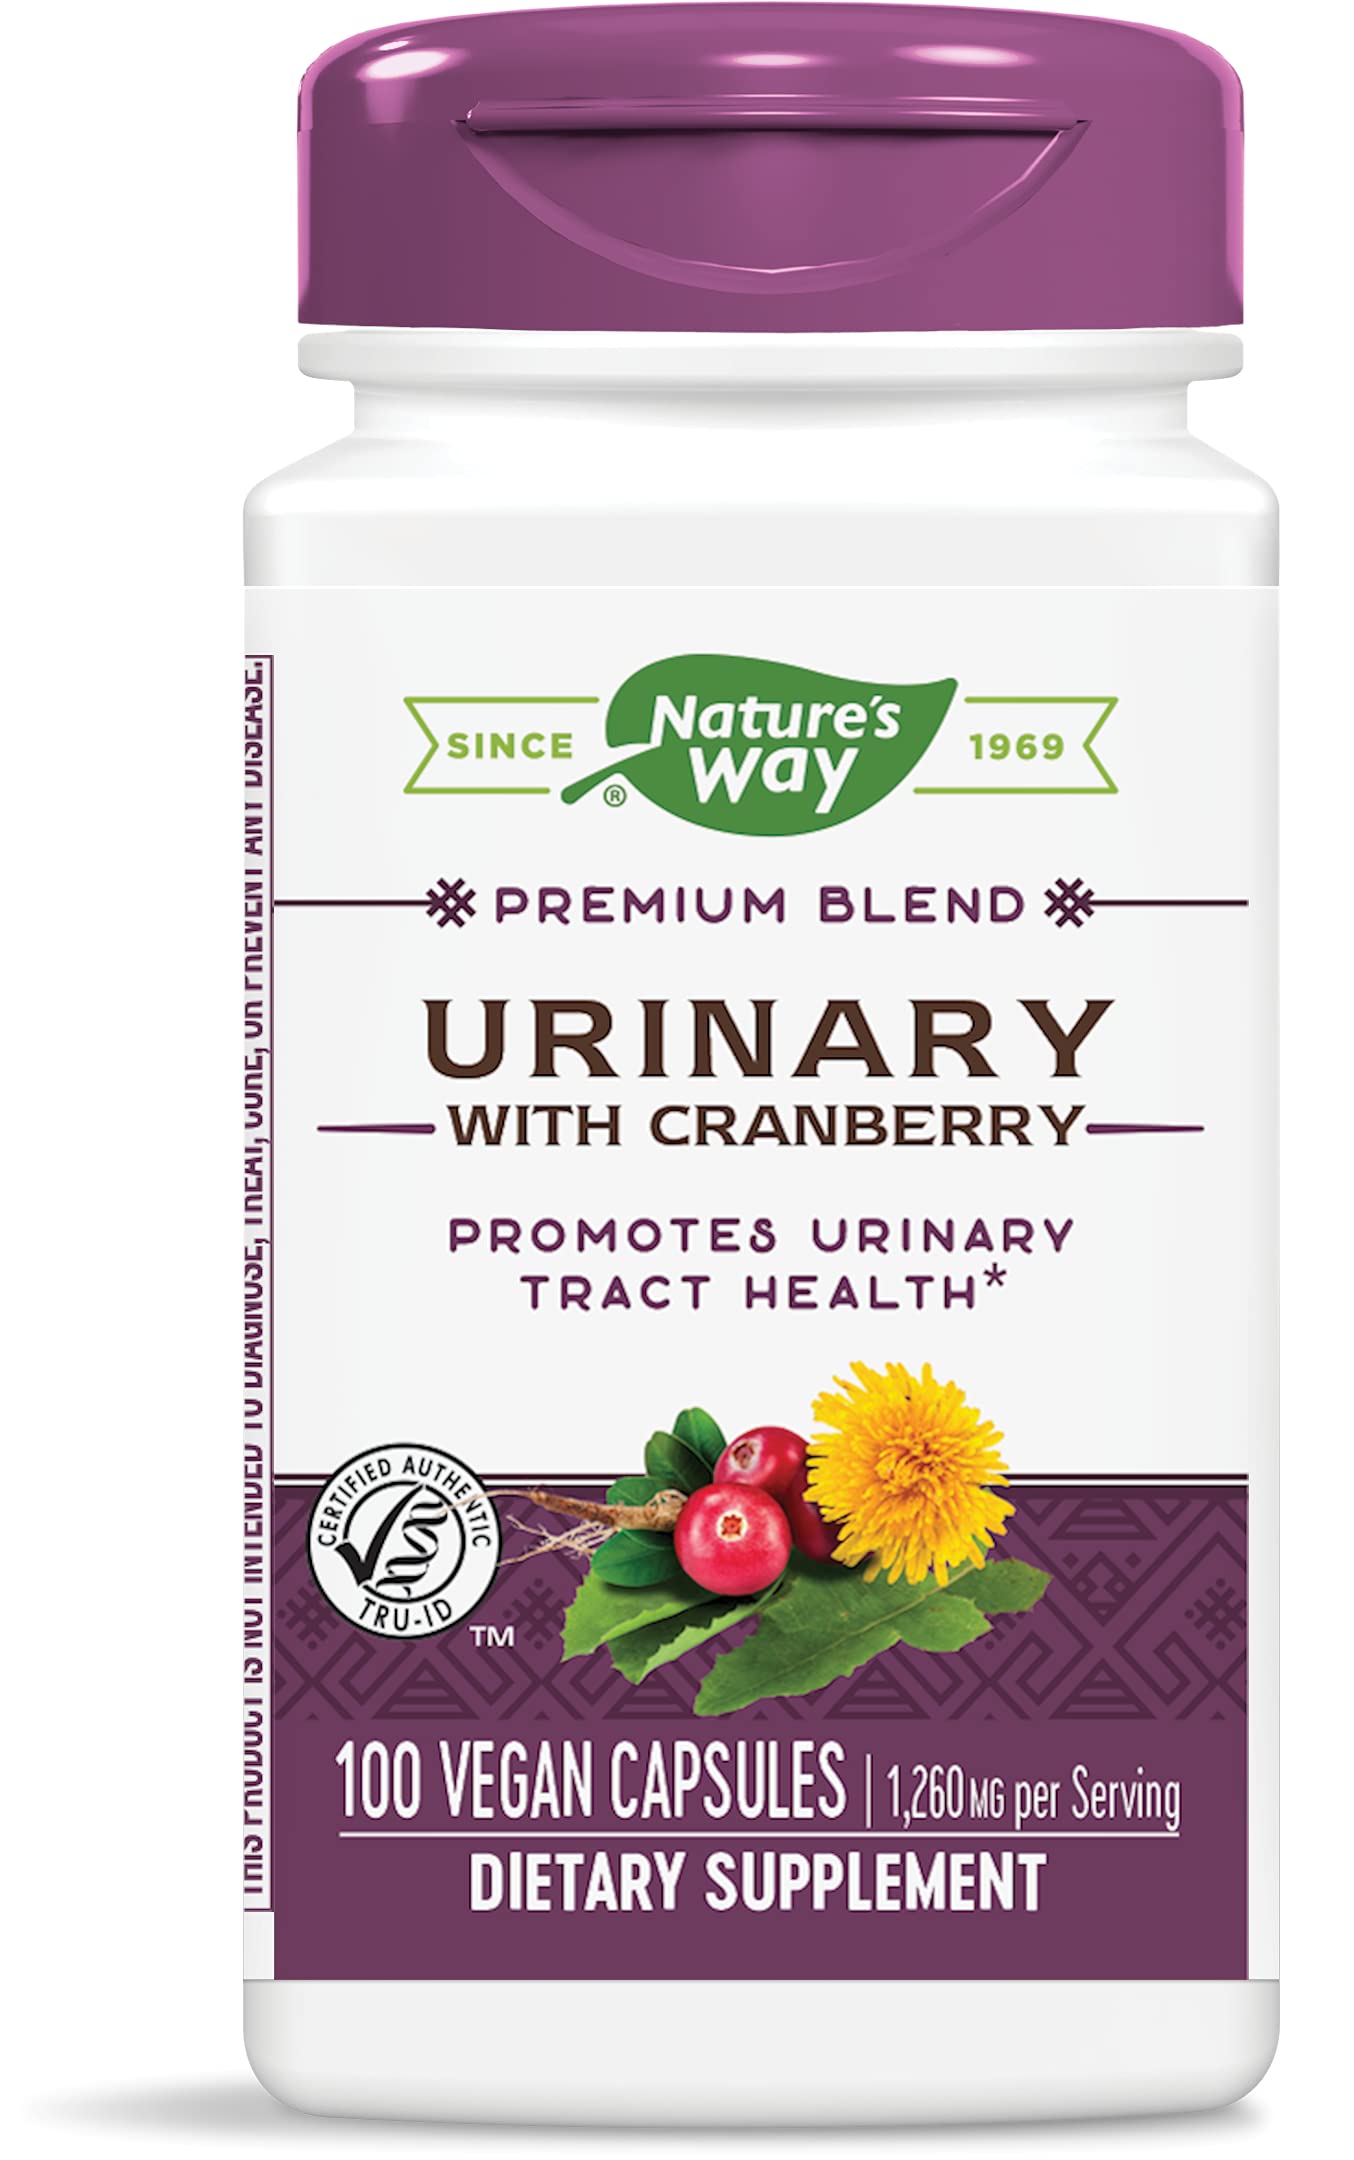 Nature's Way Urinary with Cranberry, 1,260 mg per serving, 100 Capsules